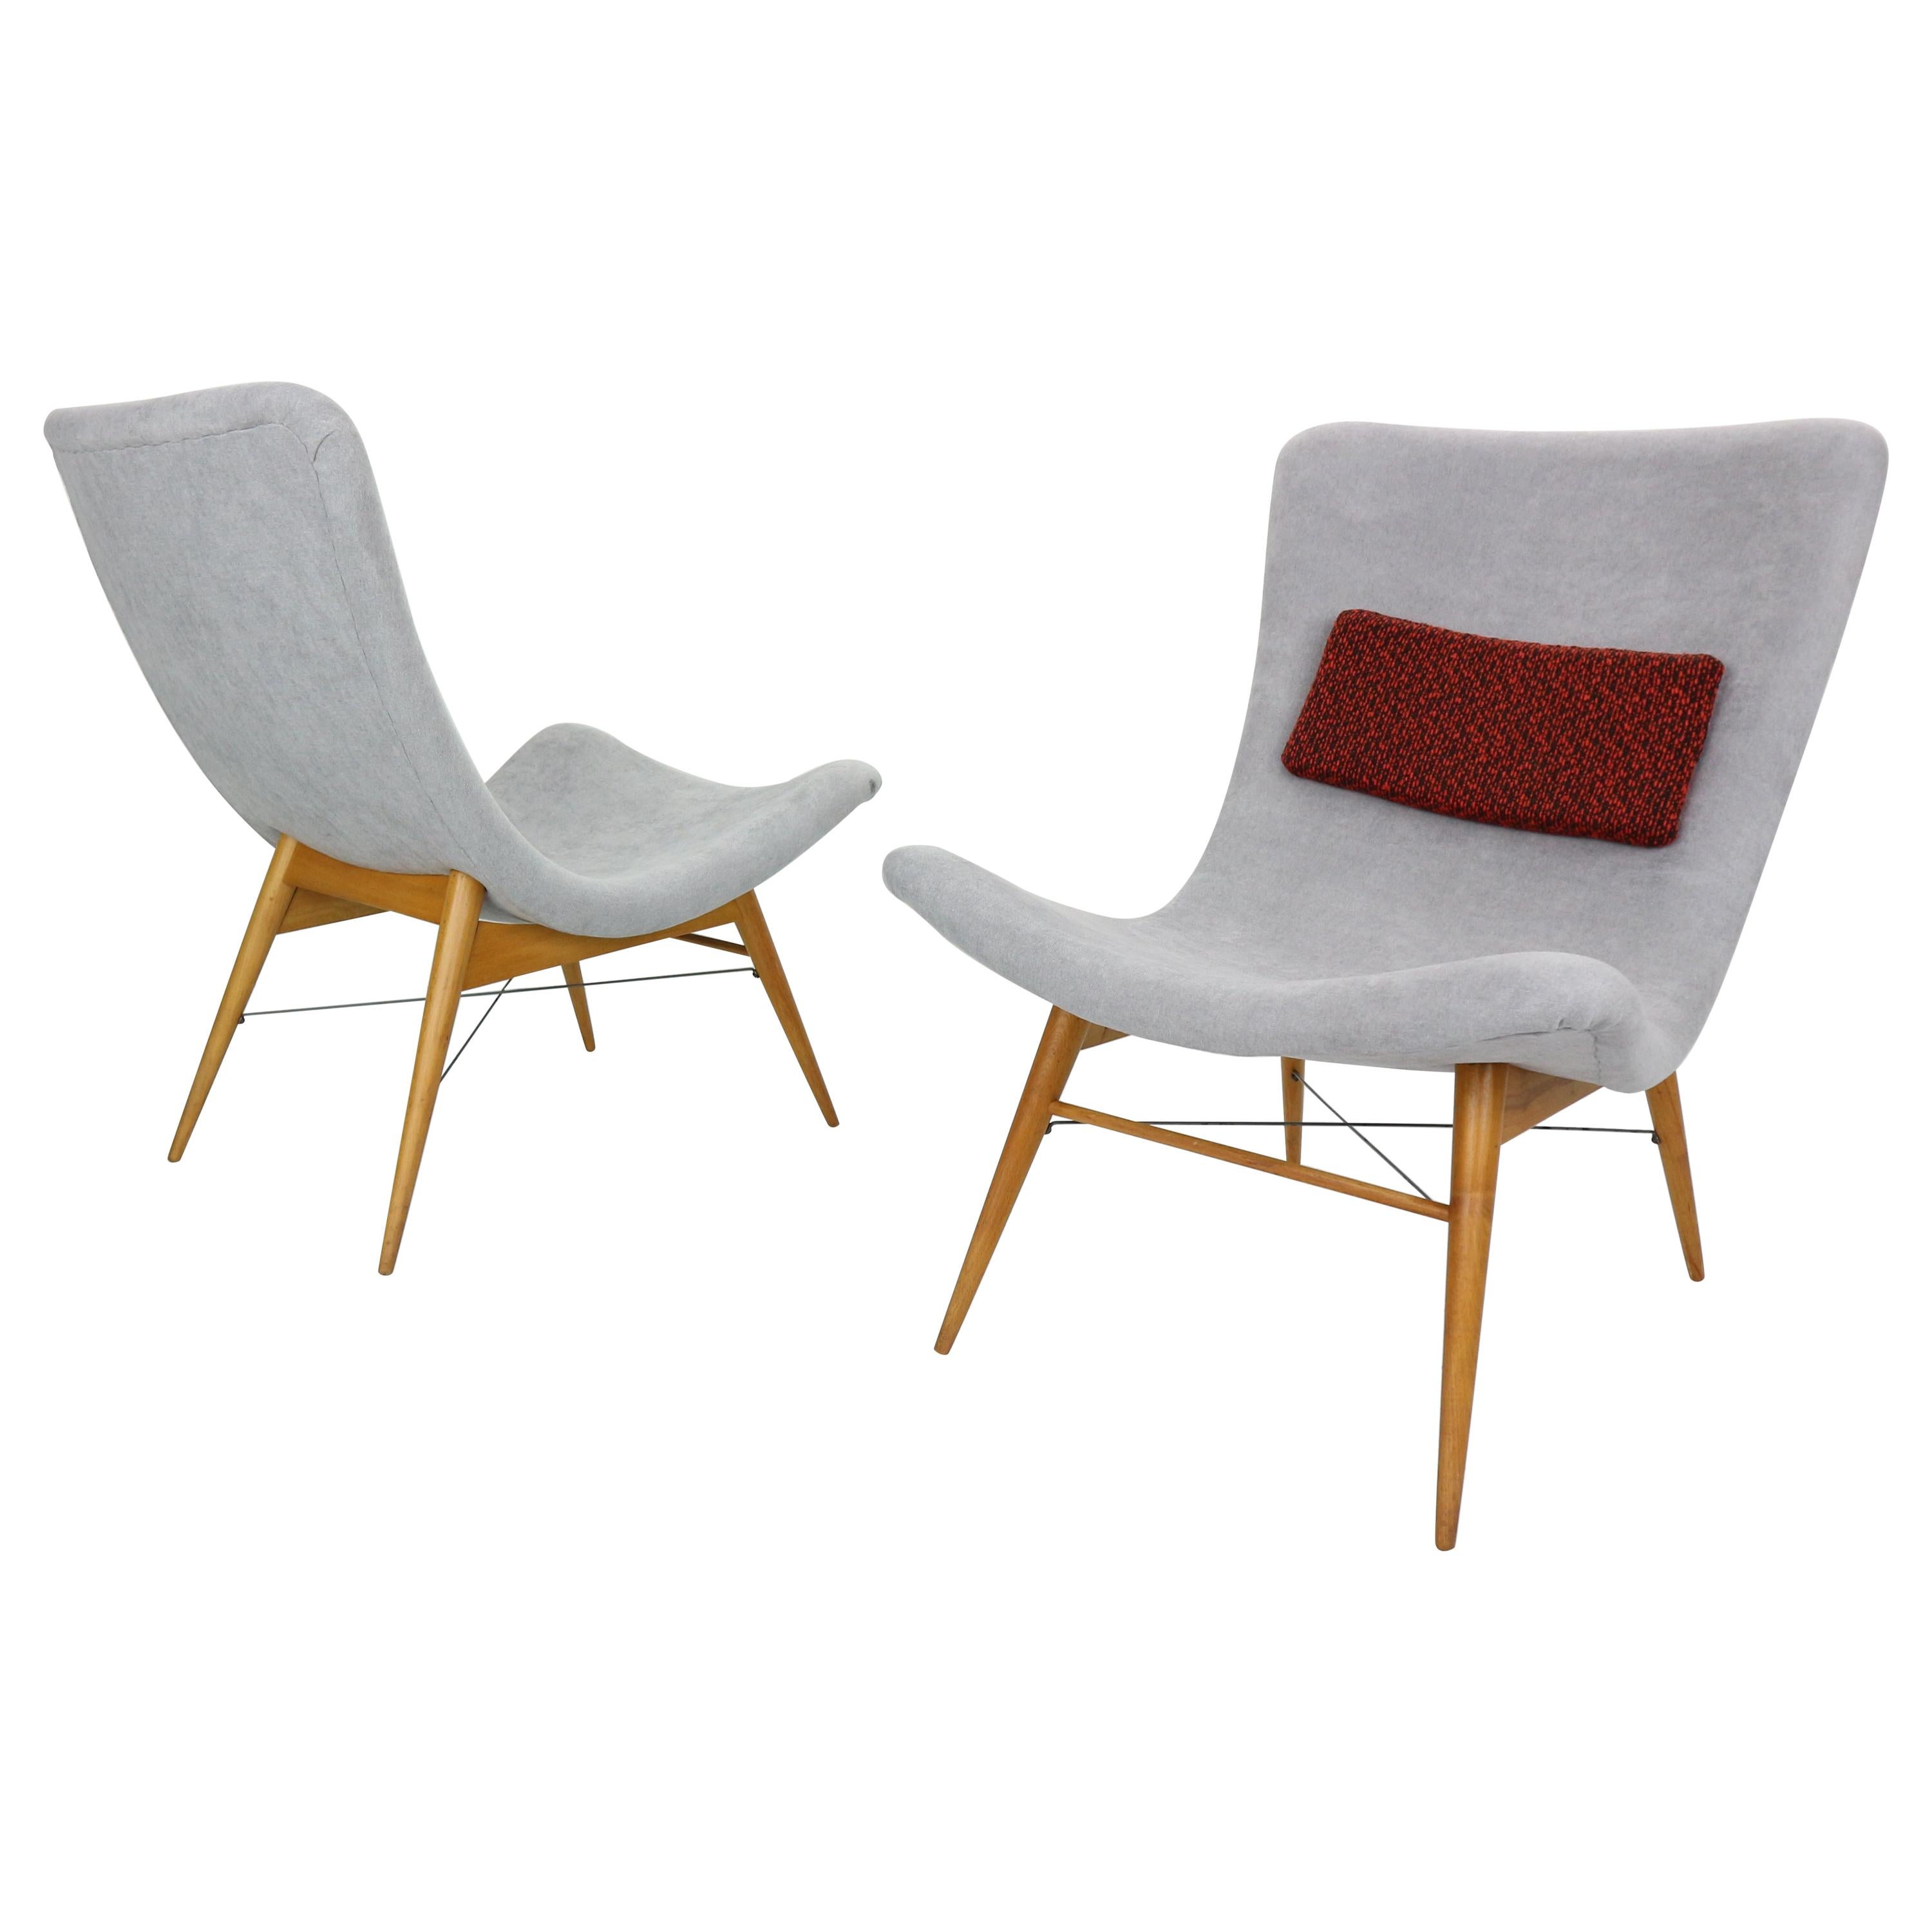 Set of 2 Lounge Chairs by Miroslav Navratil, Newly Reupholstered, 1959s